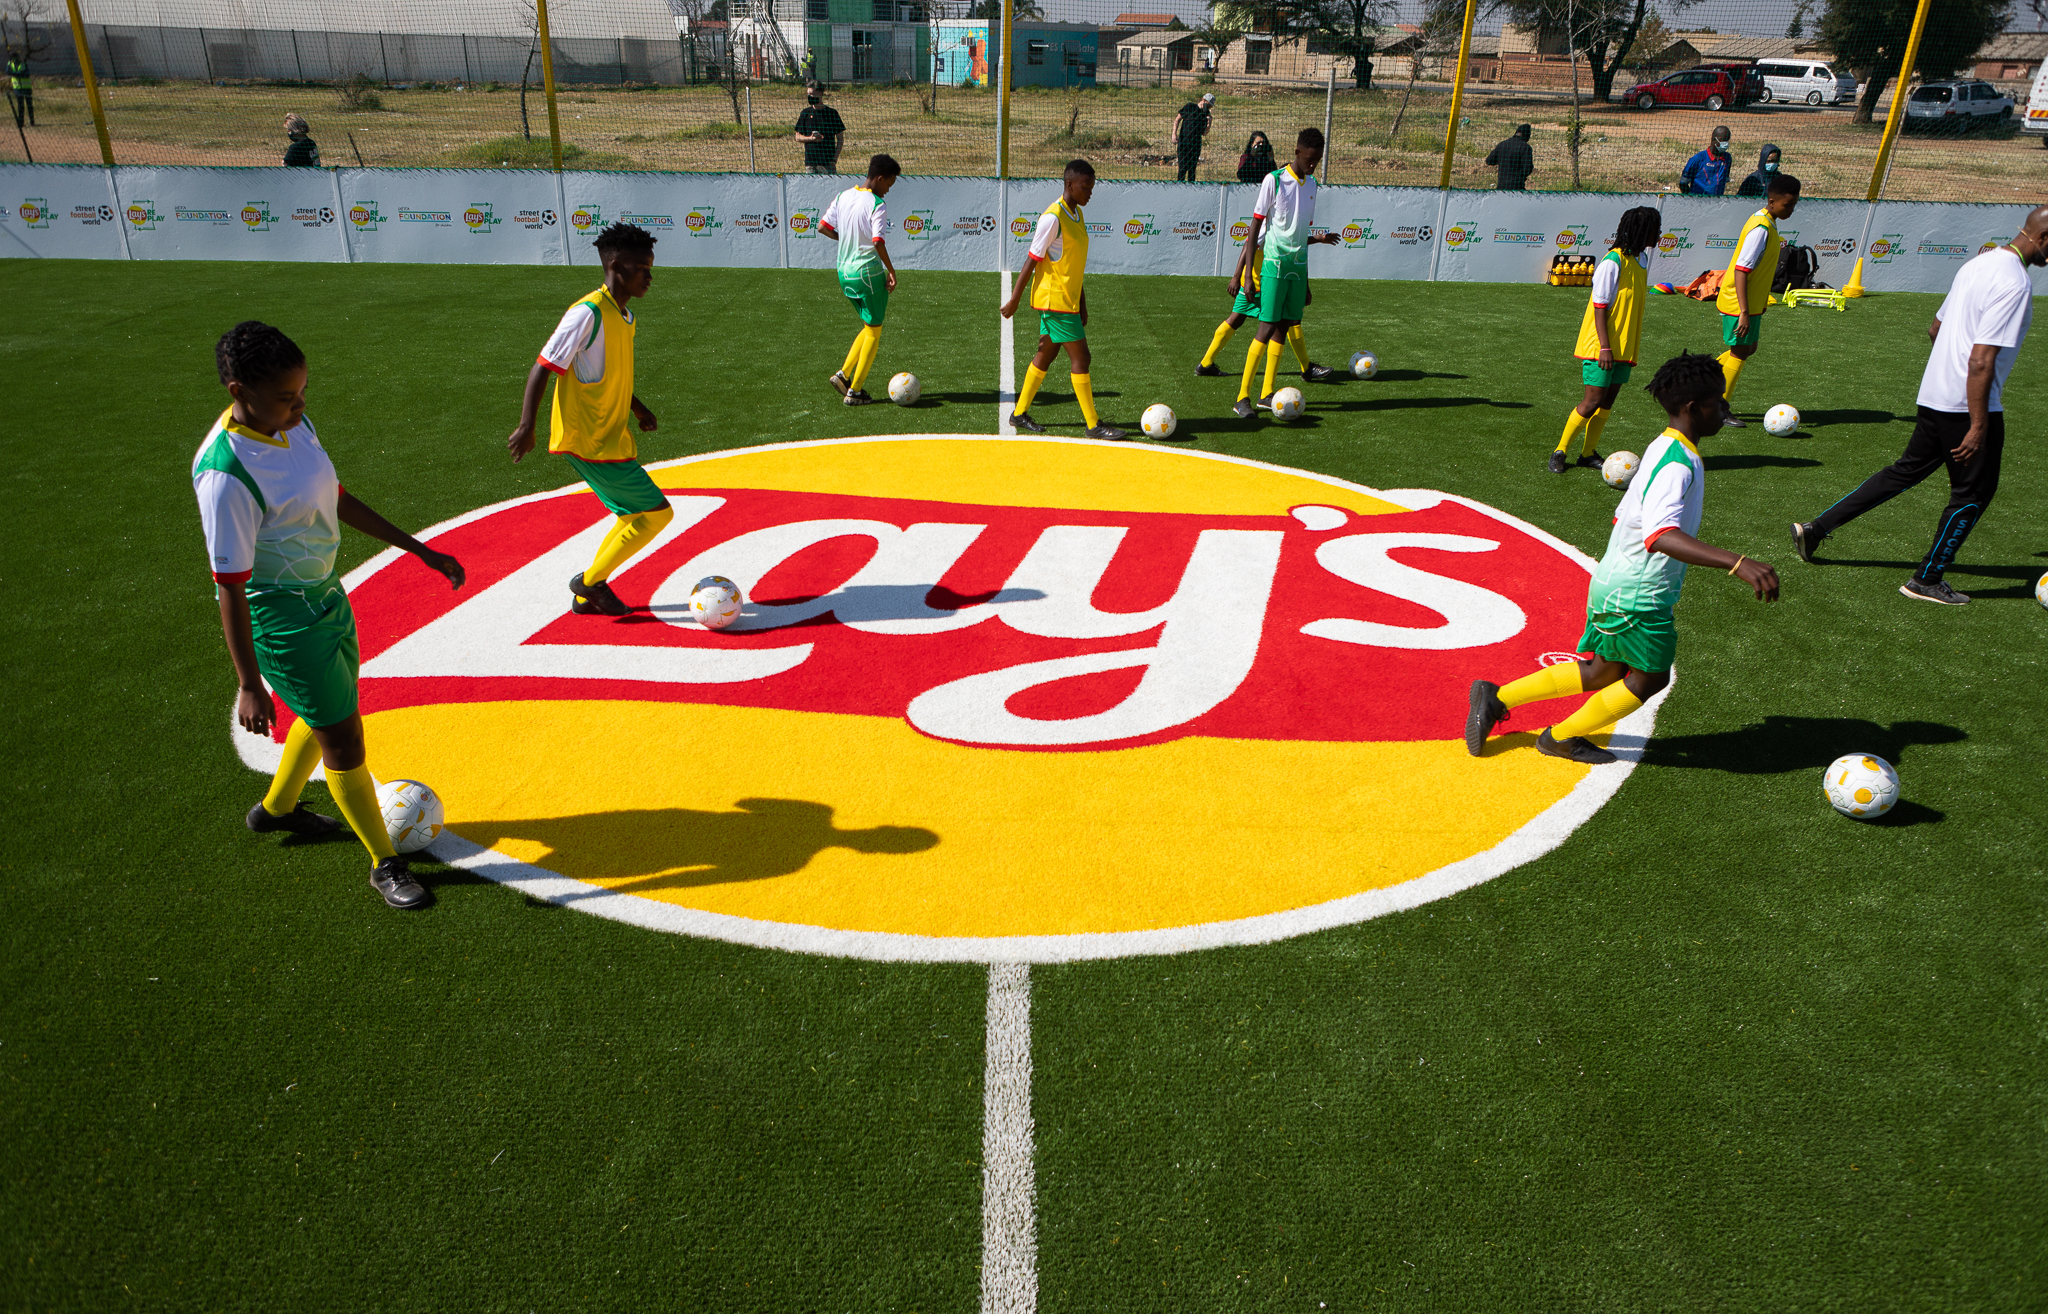 01_Lays RePlay Pitch_Training Session